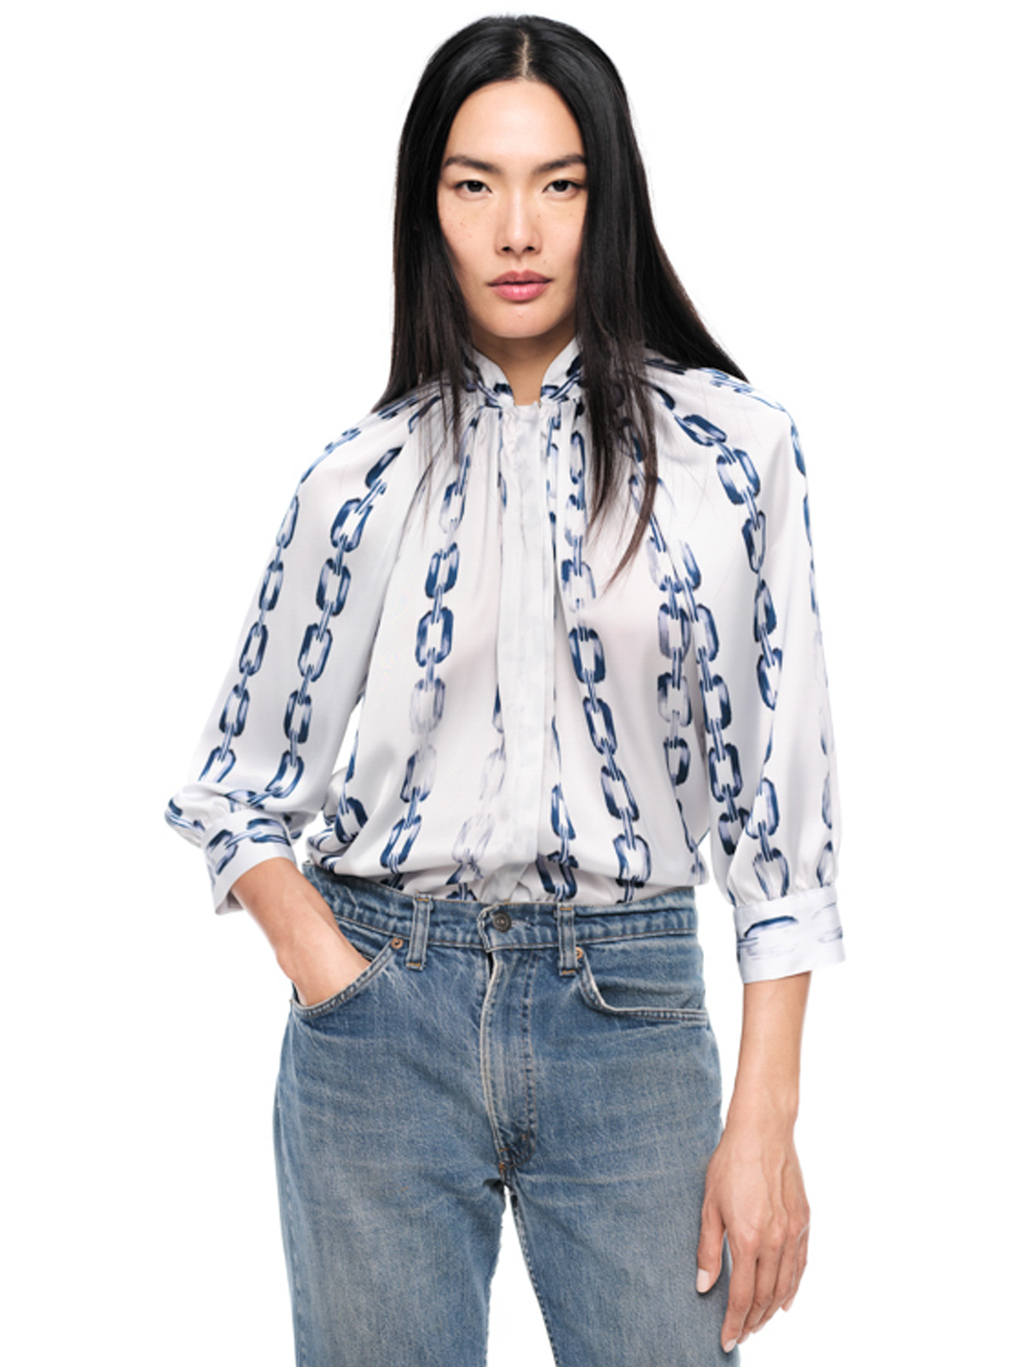 Chainlink Gathered Blouse